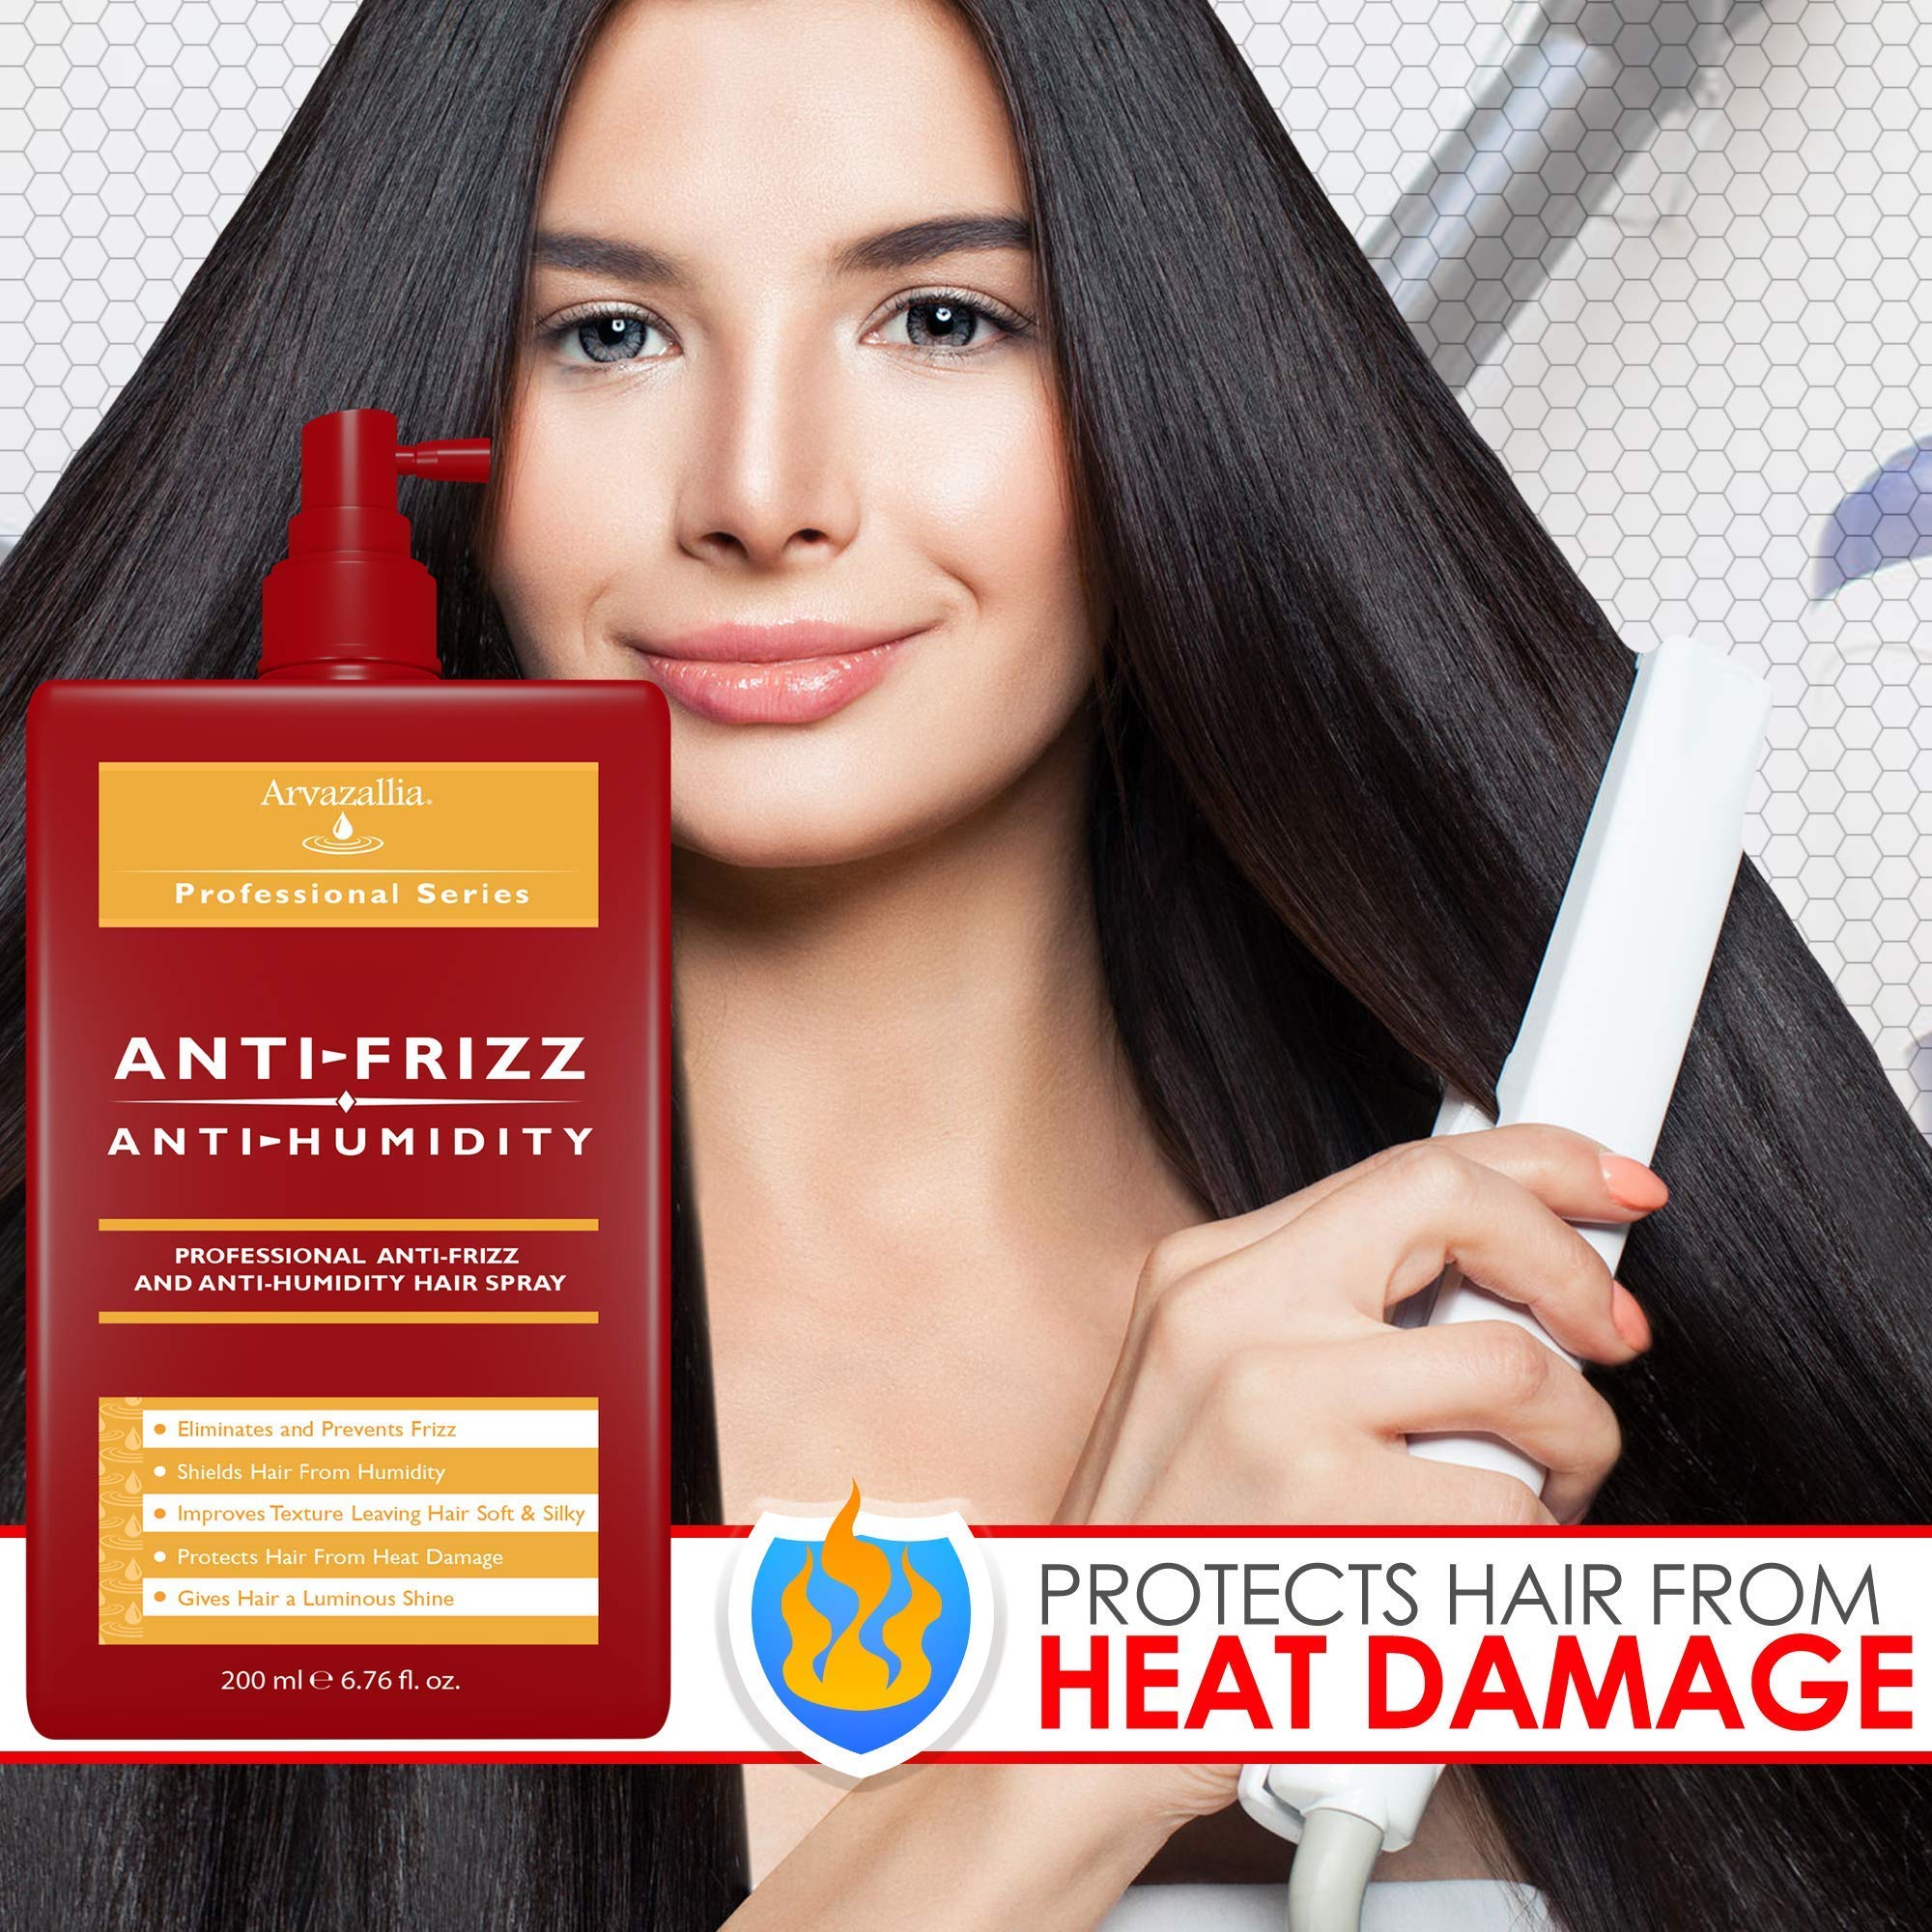 Arvazallia Rejuvenating Hair Mask and Anti-Frizz & Anti-Humidity Hair Spray Bundle - Deep Conditioner , Color Protection , and Professional Frizz Control For Color-treated Hair